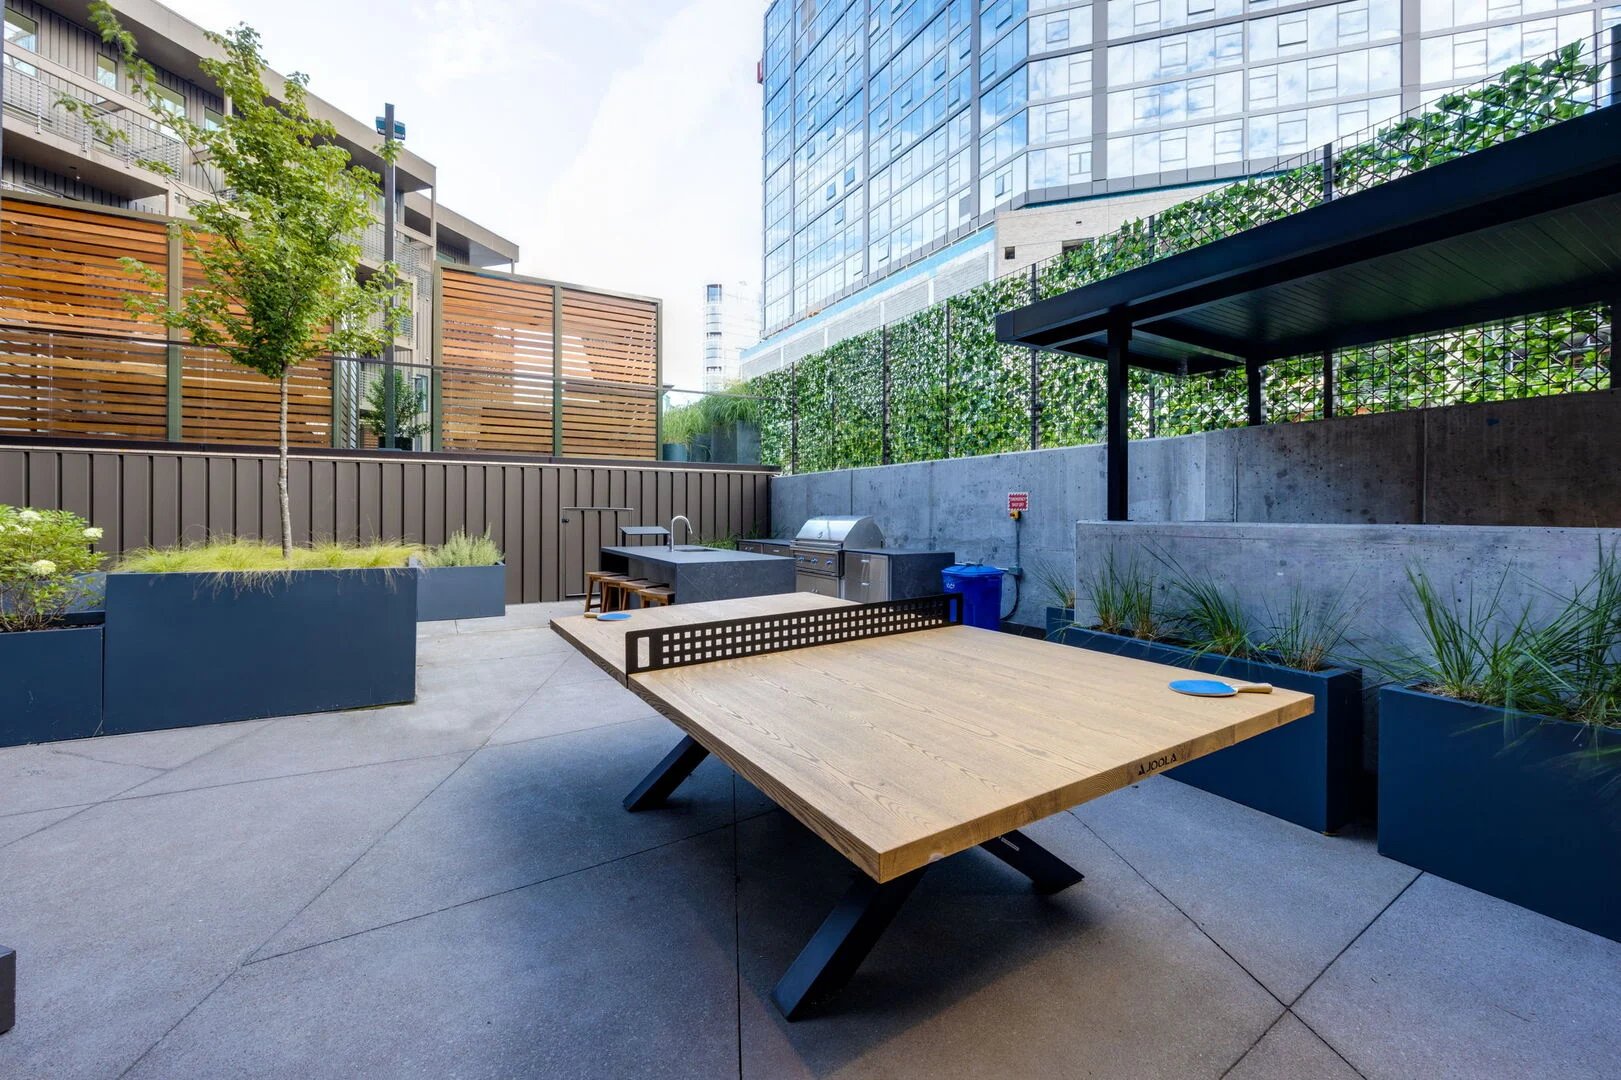 Communal Area: Outdoor furnishings for lounging with a firepit, Ping Pong, and built-in BBQ grill with an outdoor island offering bar seating.